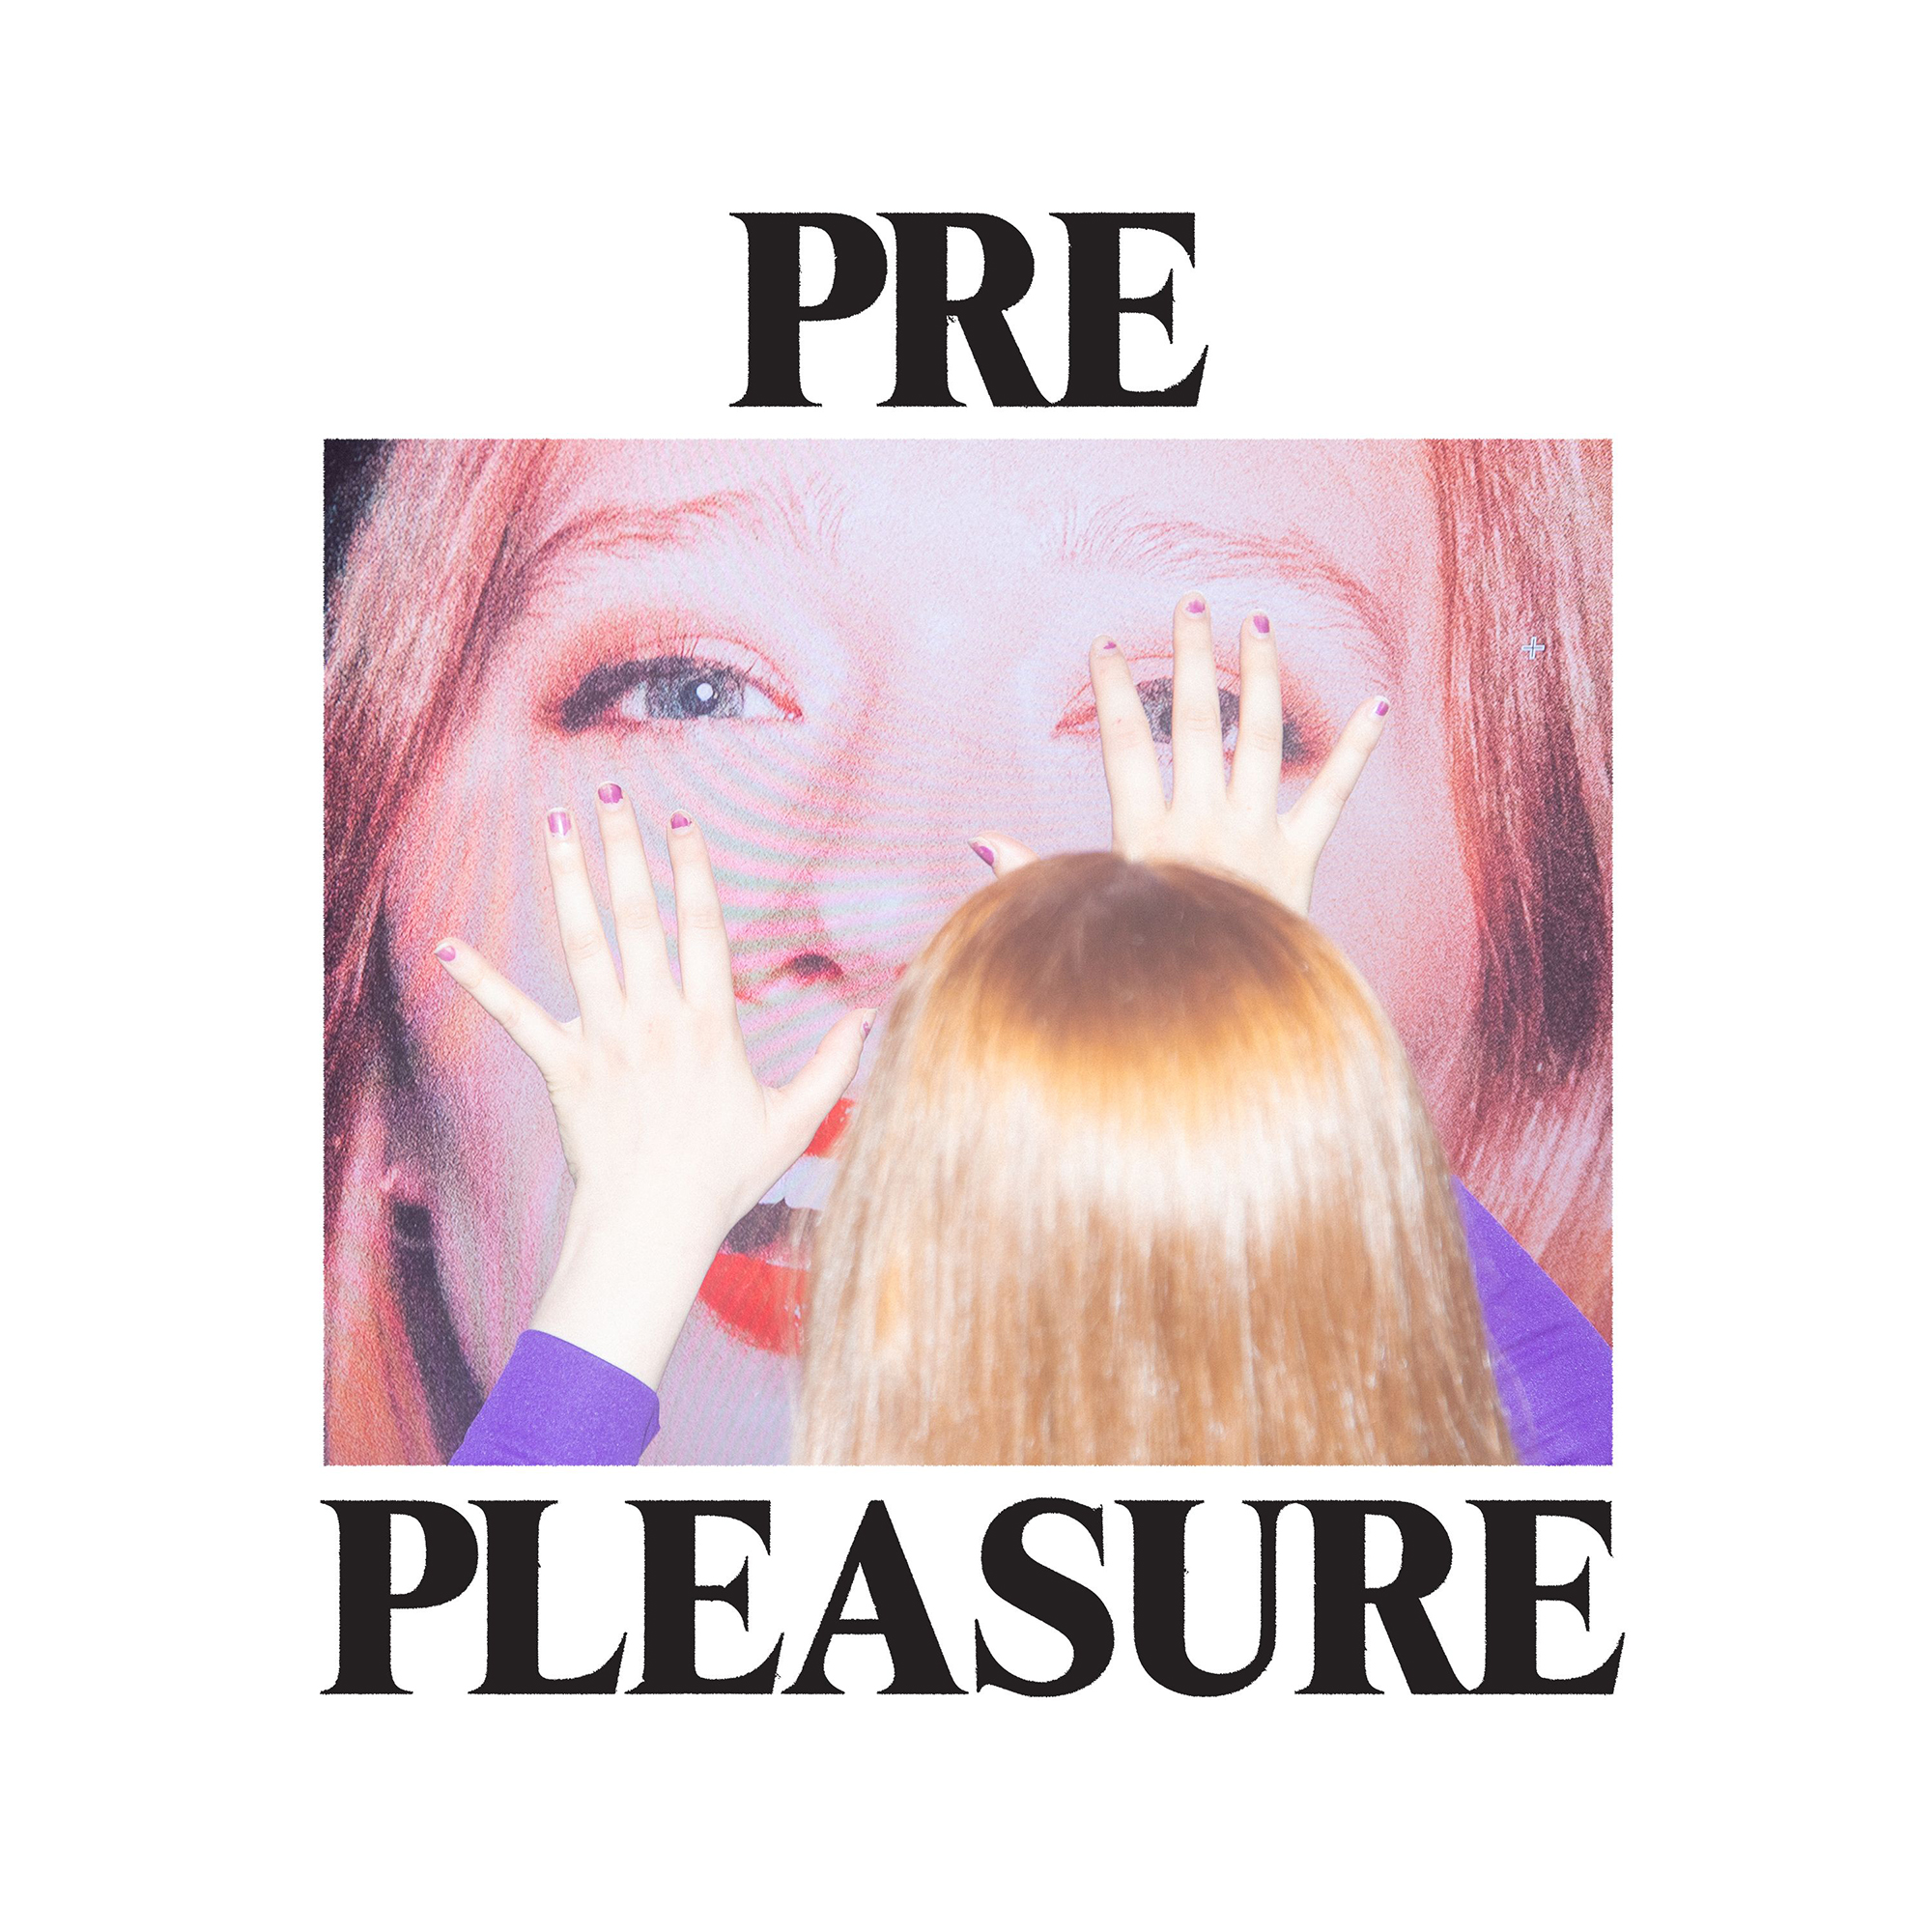 Jaklin Sex Video - Julia Jacklin - New album PRE PLEASURE out August 26, 2022. Pre-order now  and stream the first single, \